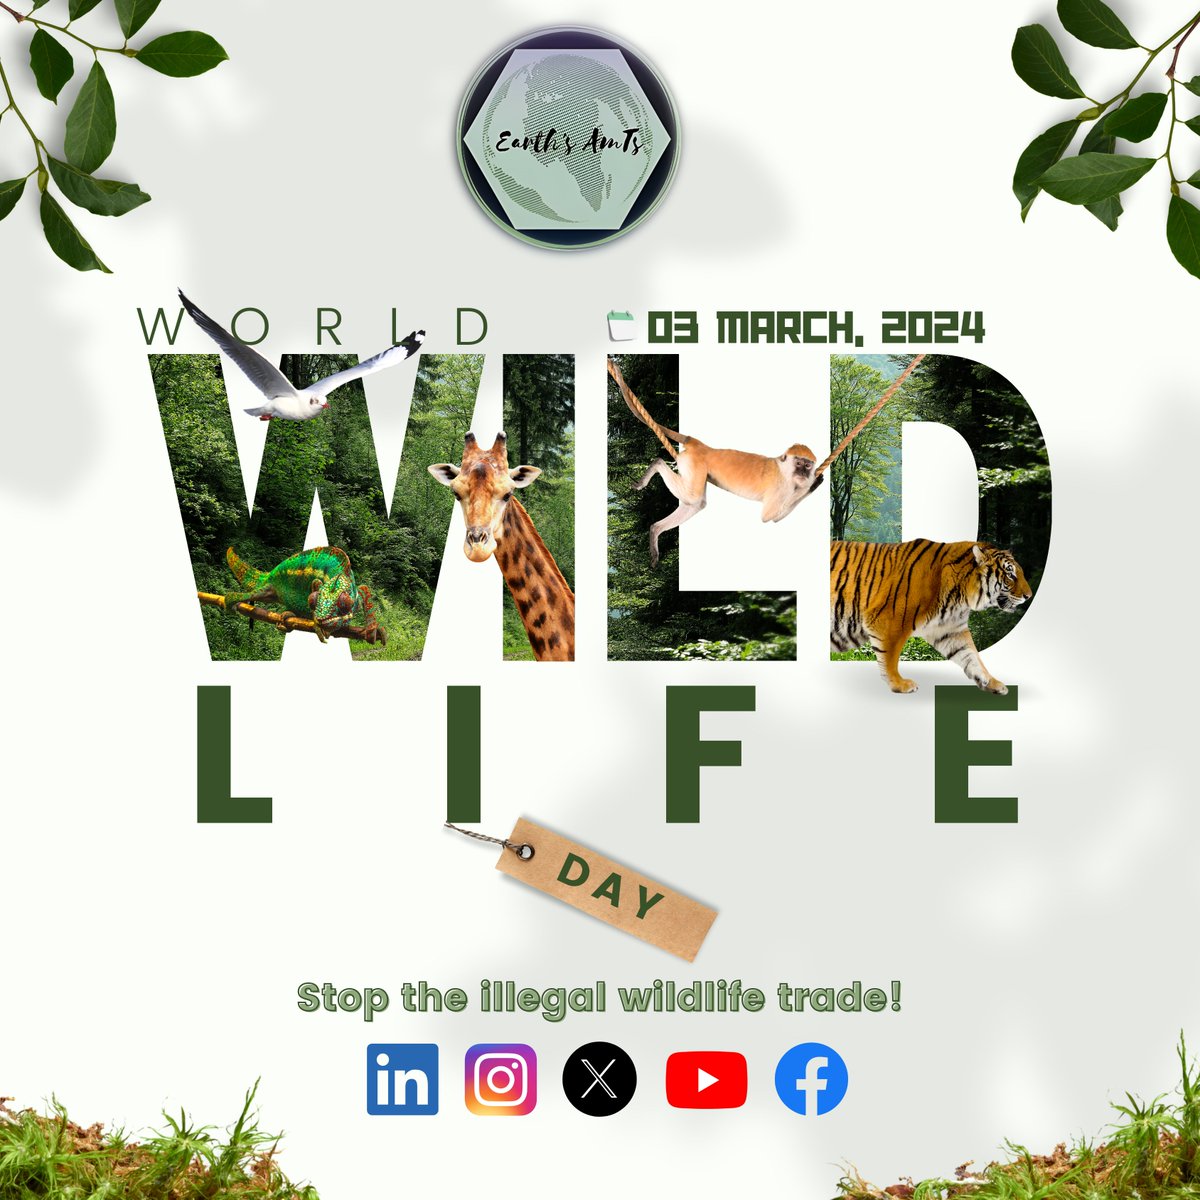 Today, on World Wildlife Day, we celebrate the incredible diversity of life on Earth and explore the ways digital innovation is helping us connect with and protect it. #wildlife #worldwildlifeday #wildlifeplanet #wildlifeconservation #earthsantsorg